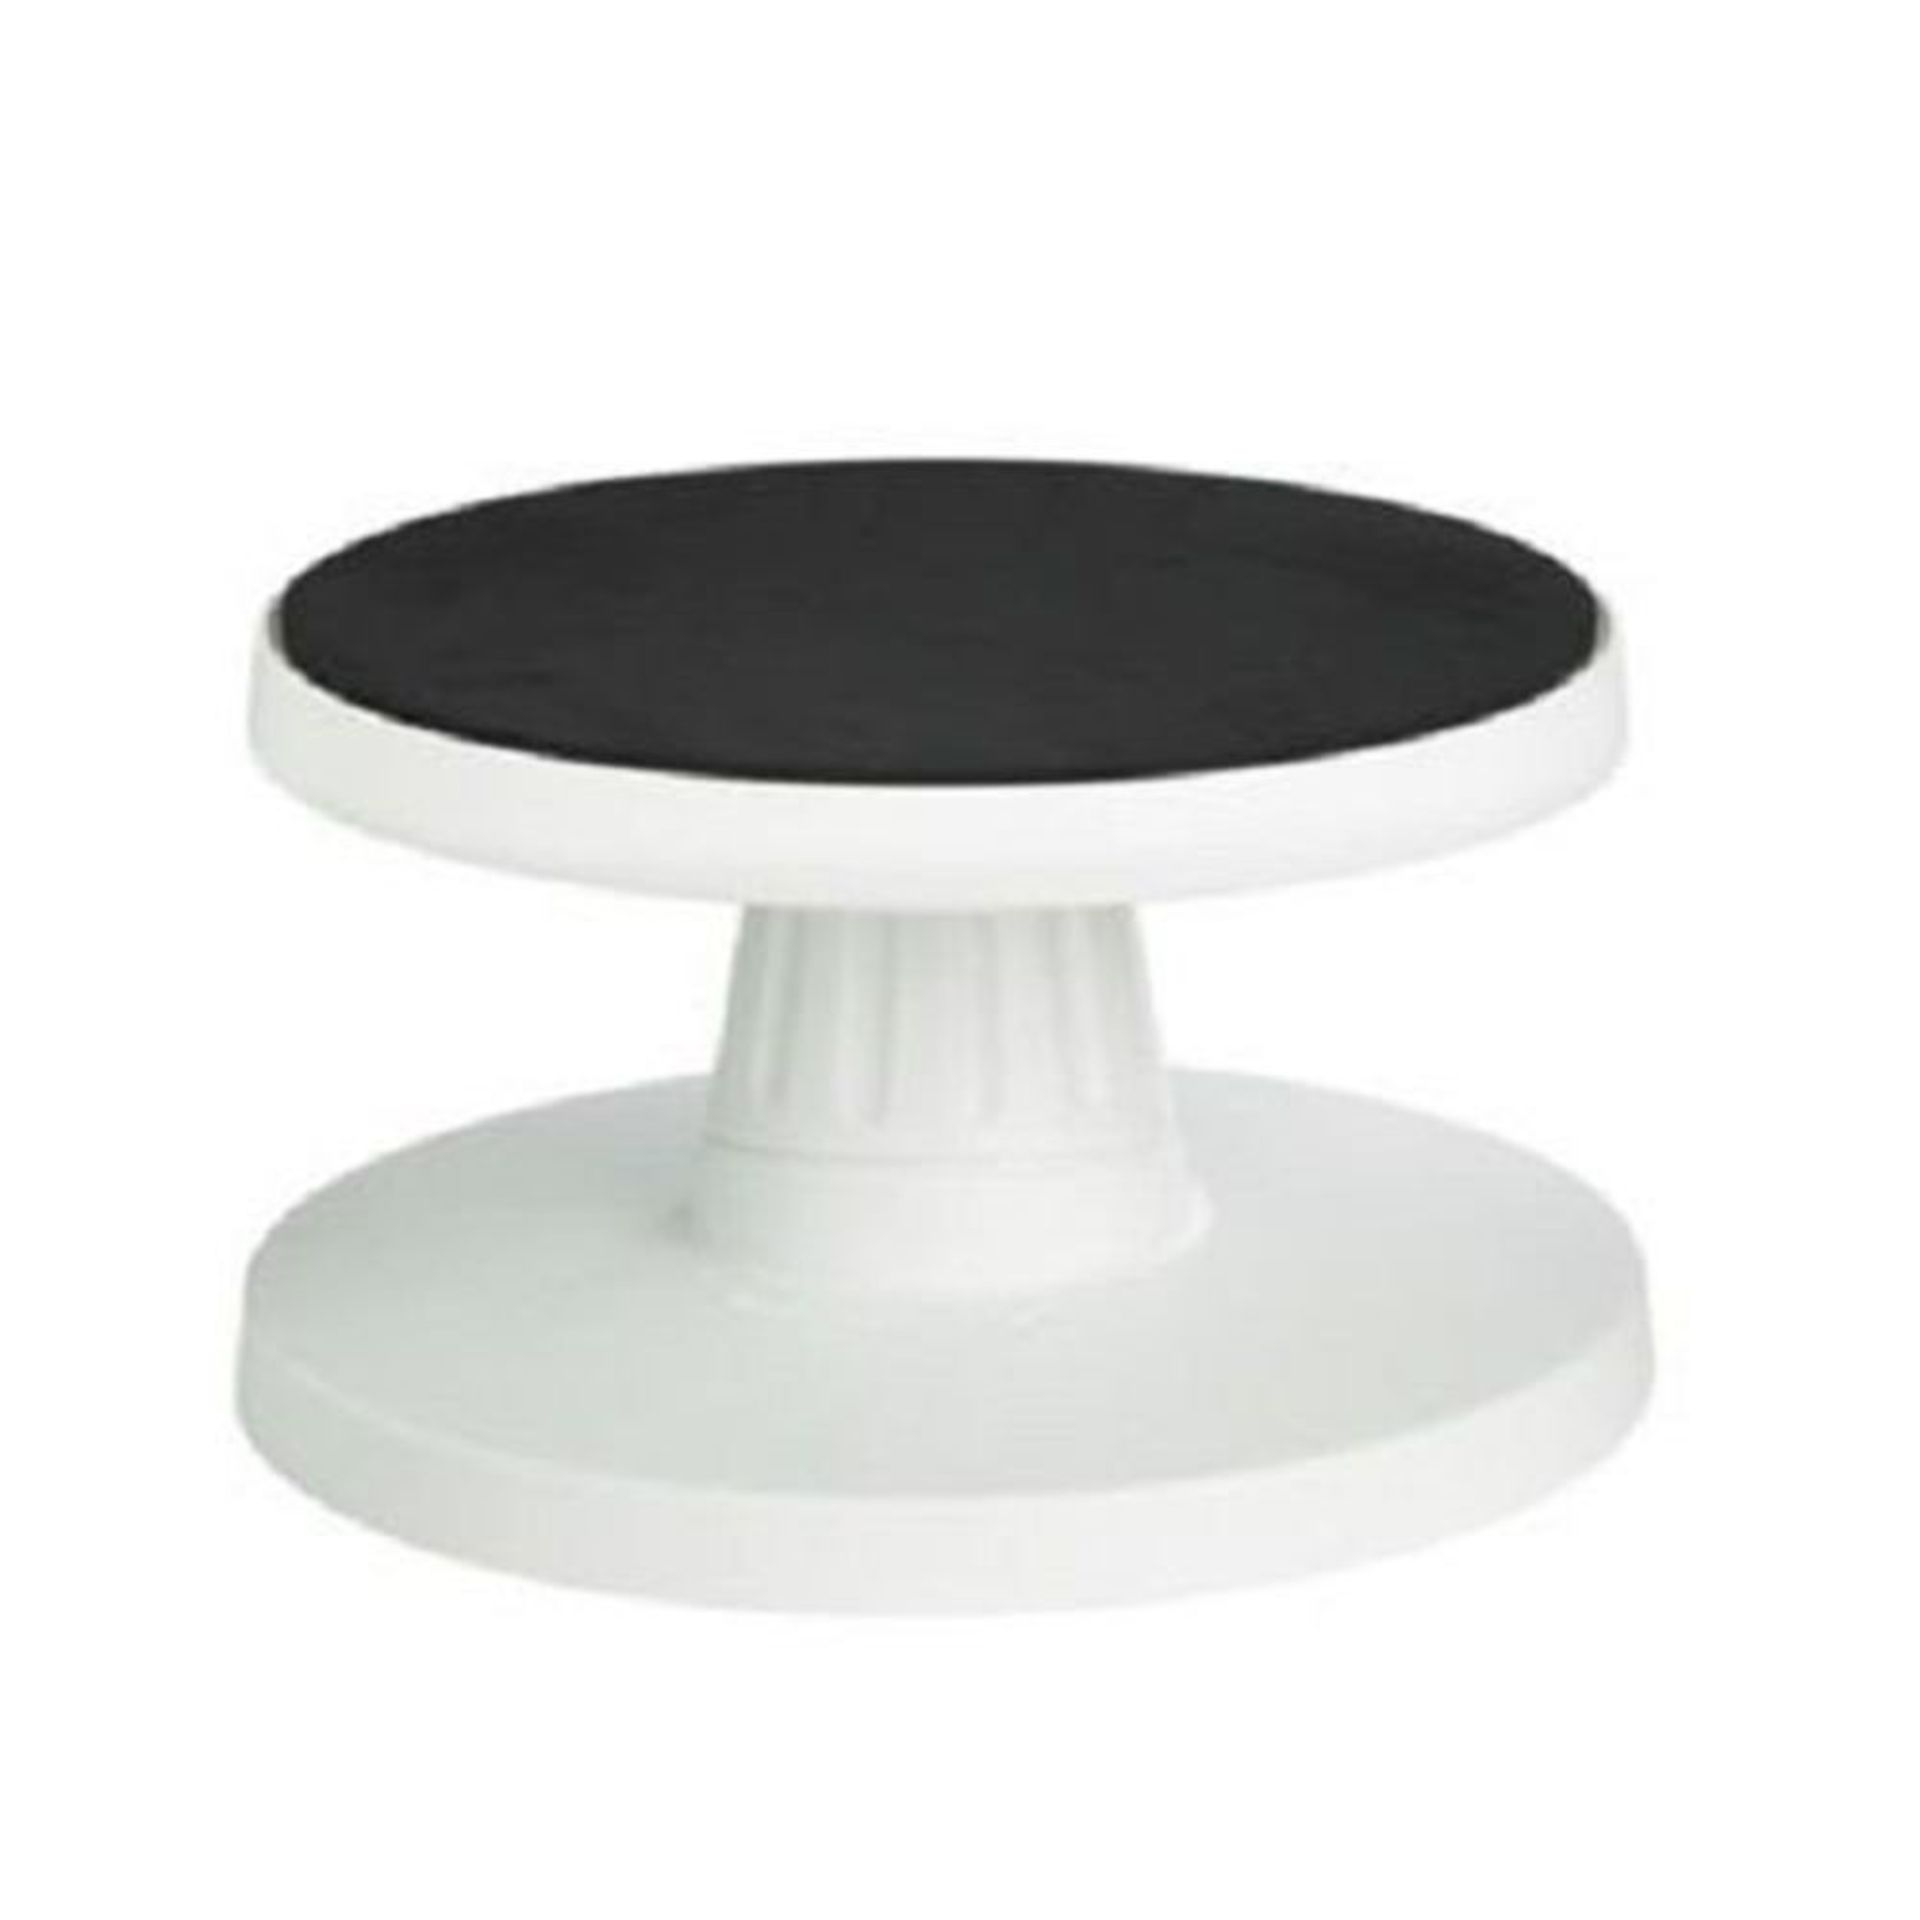 V Brand New Adjustable Cake Decorating Table RRP £20.39